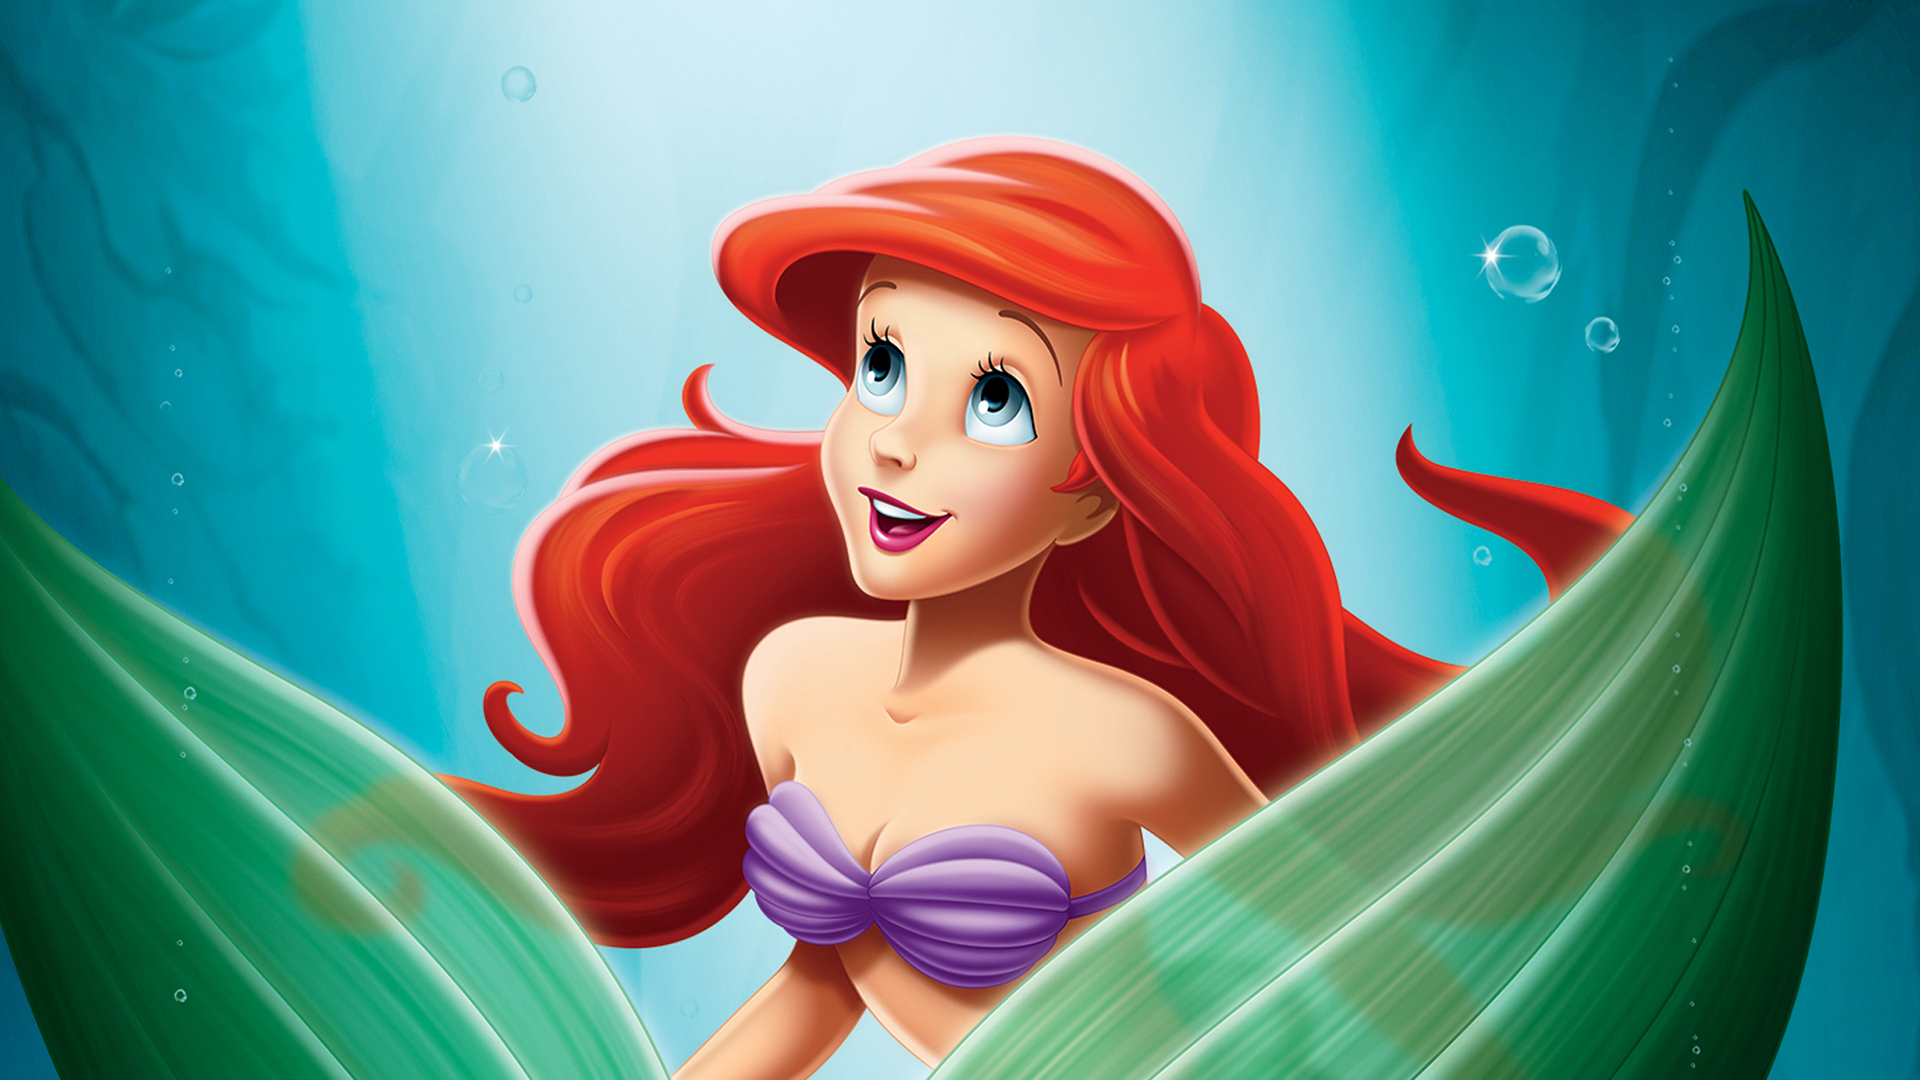 Desktop Wallpaper The Little Mermaid, Animated Movie, Mermaid, HD Image, Picture, Background, Pqqoio